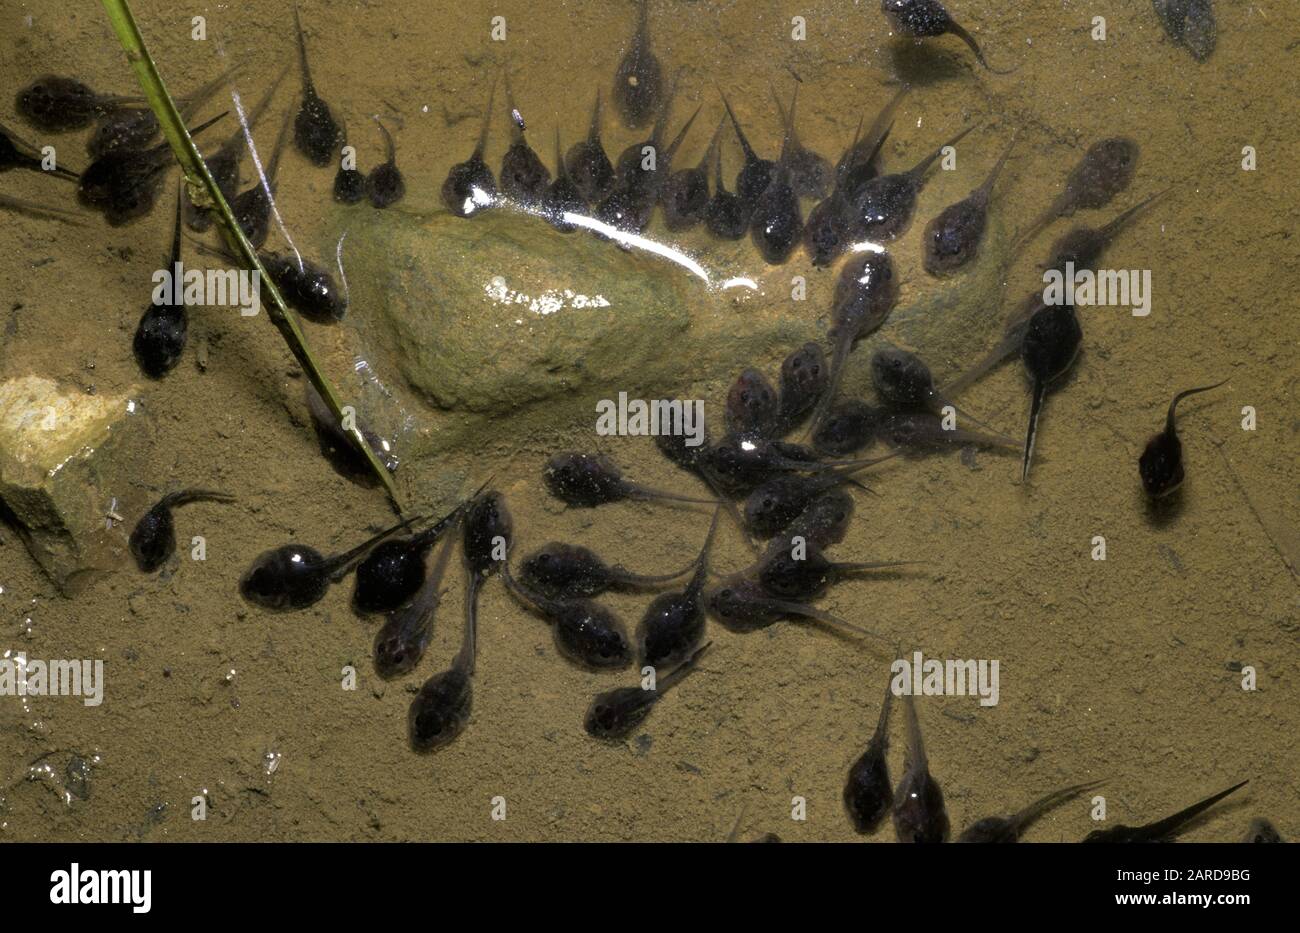 Tadpoles (also called a pollywogs) are the larval stage in the life cycle of an amphibian, particularly that of a frog or toad. Stock Photo